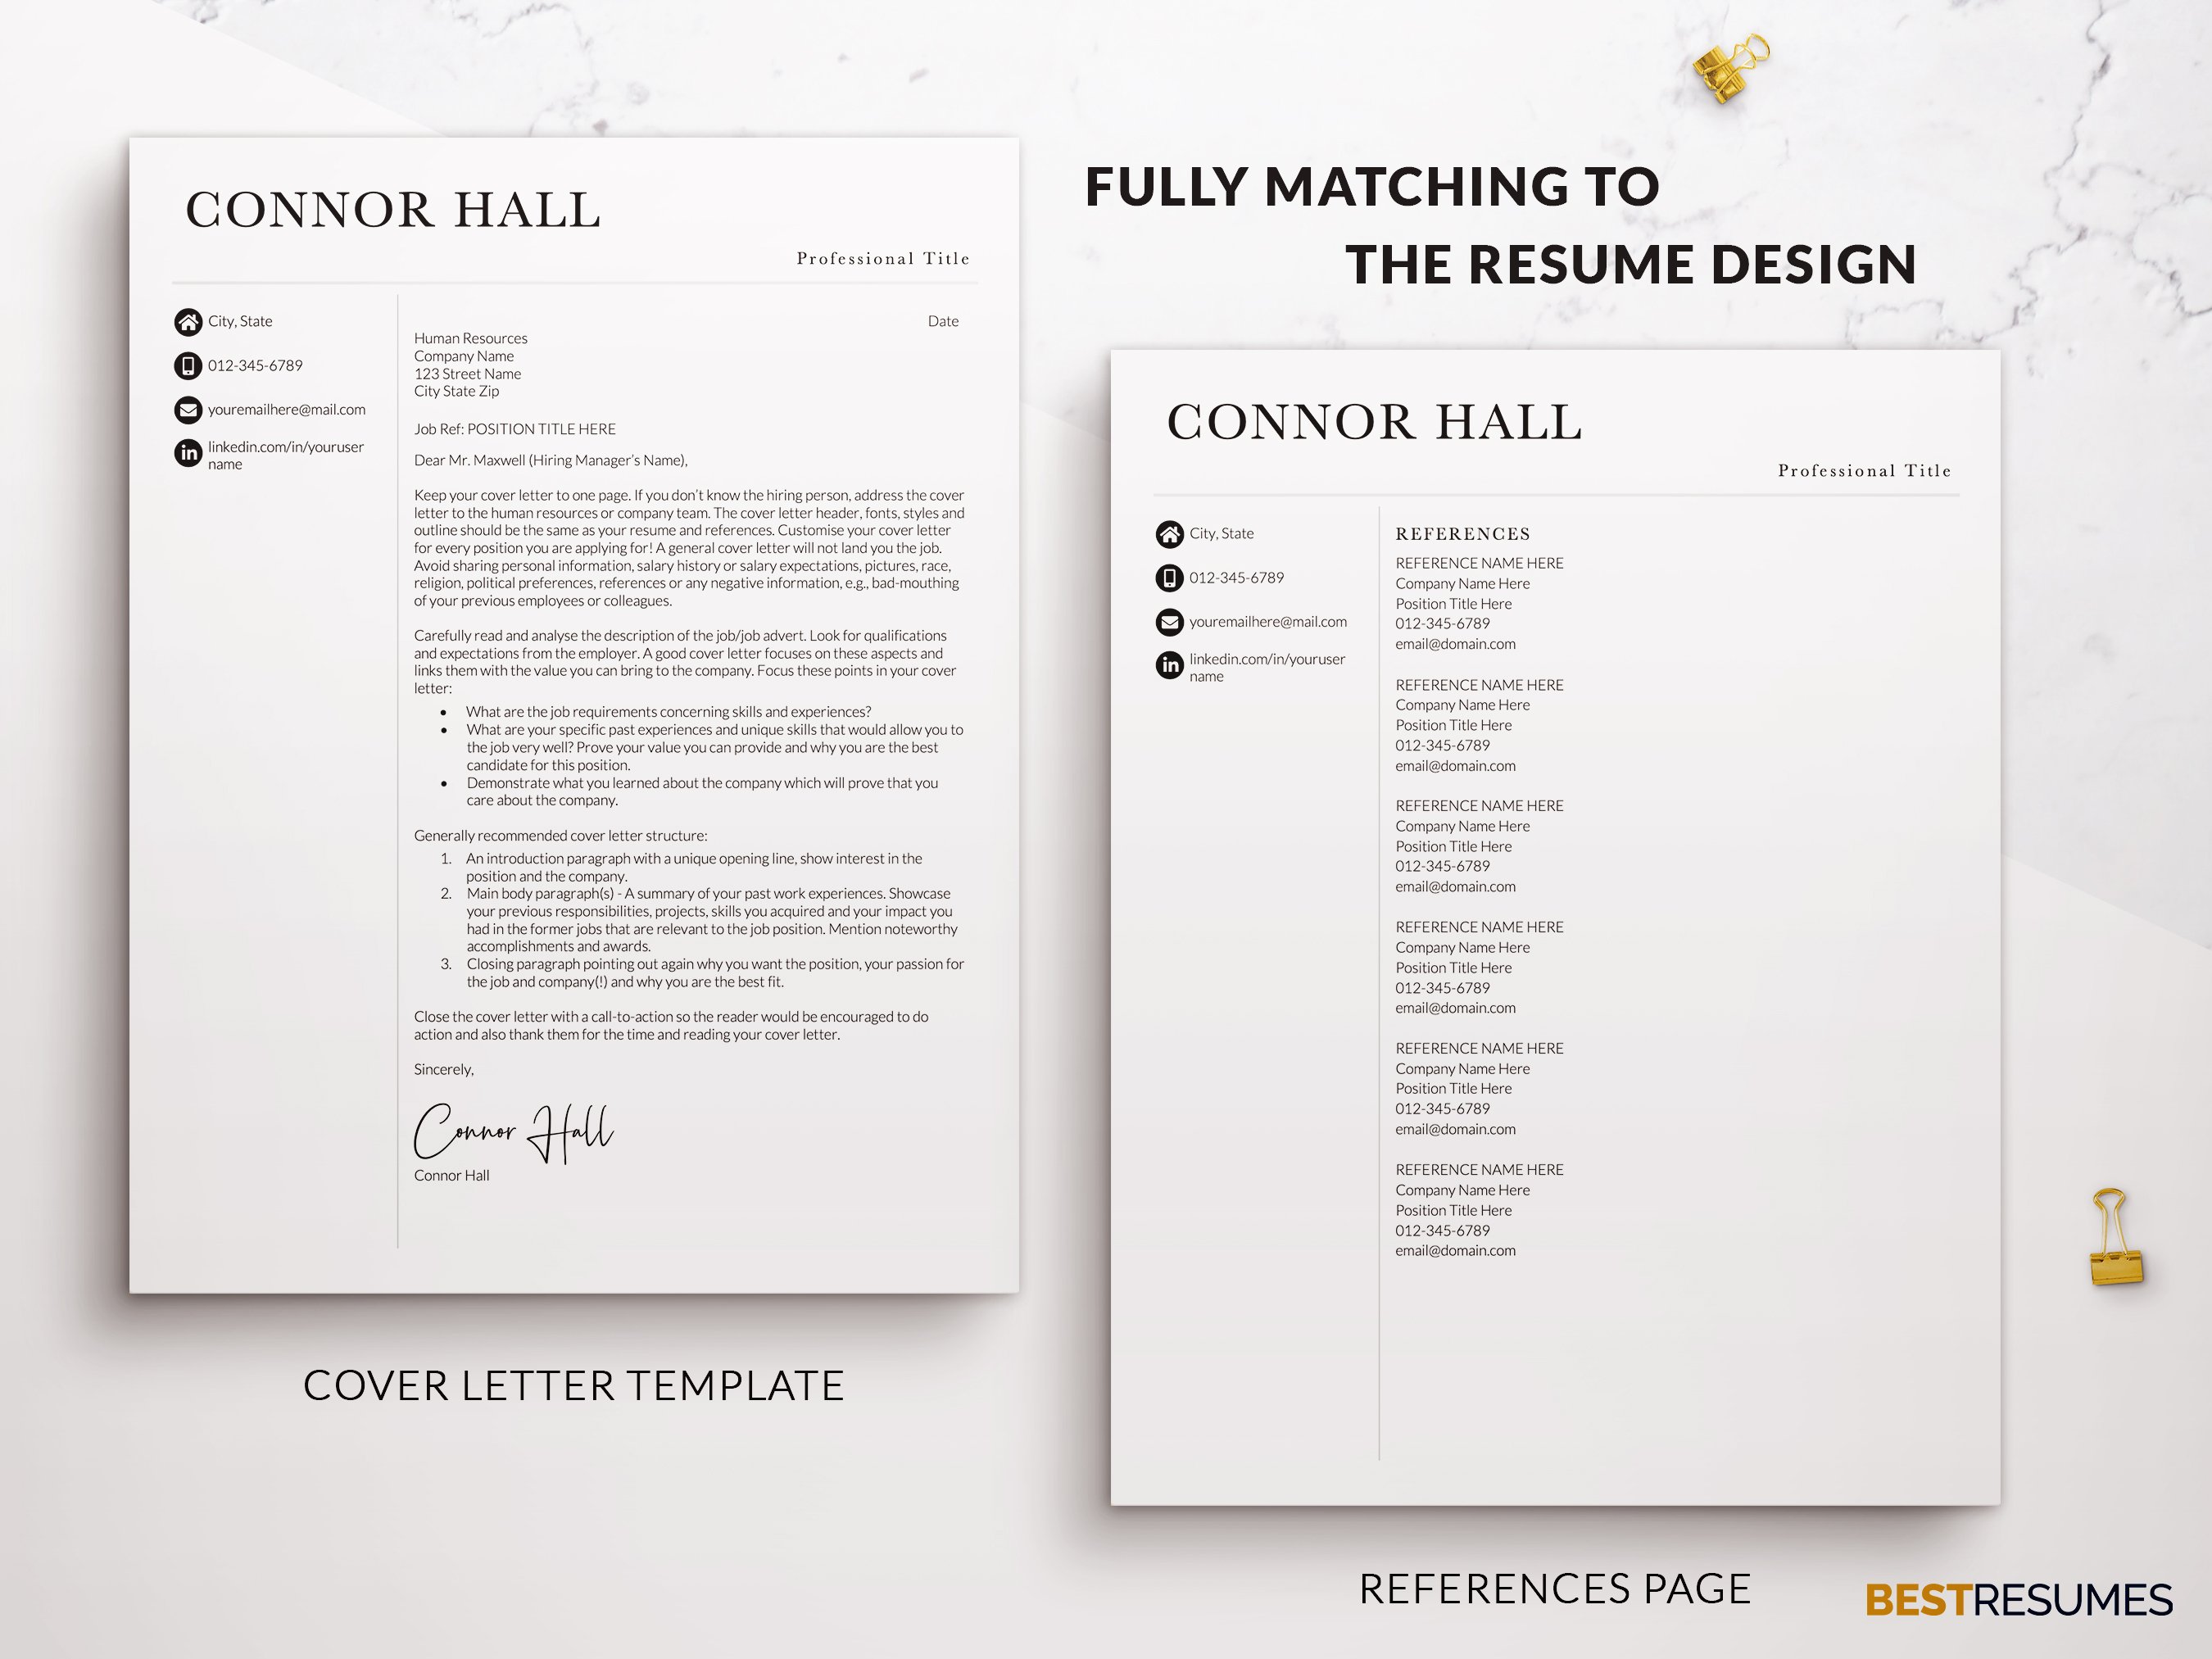 Professional Resume Page Simple CV preview image.